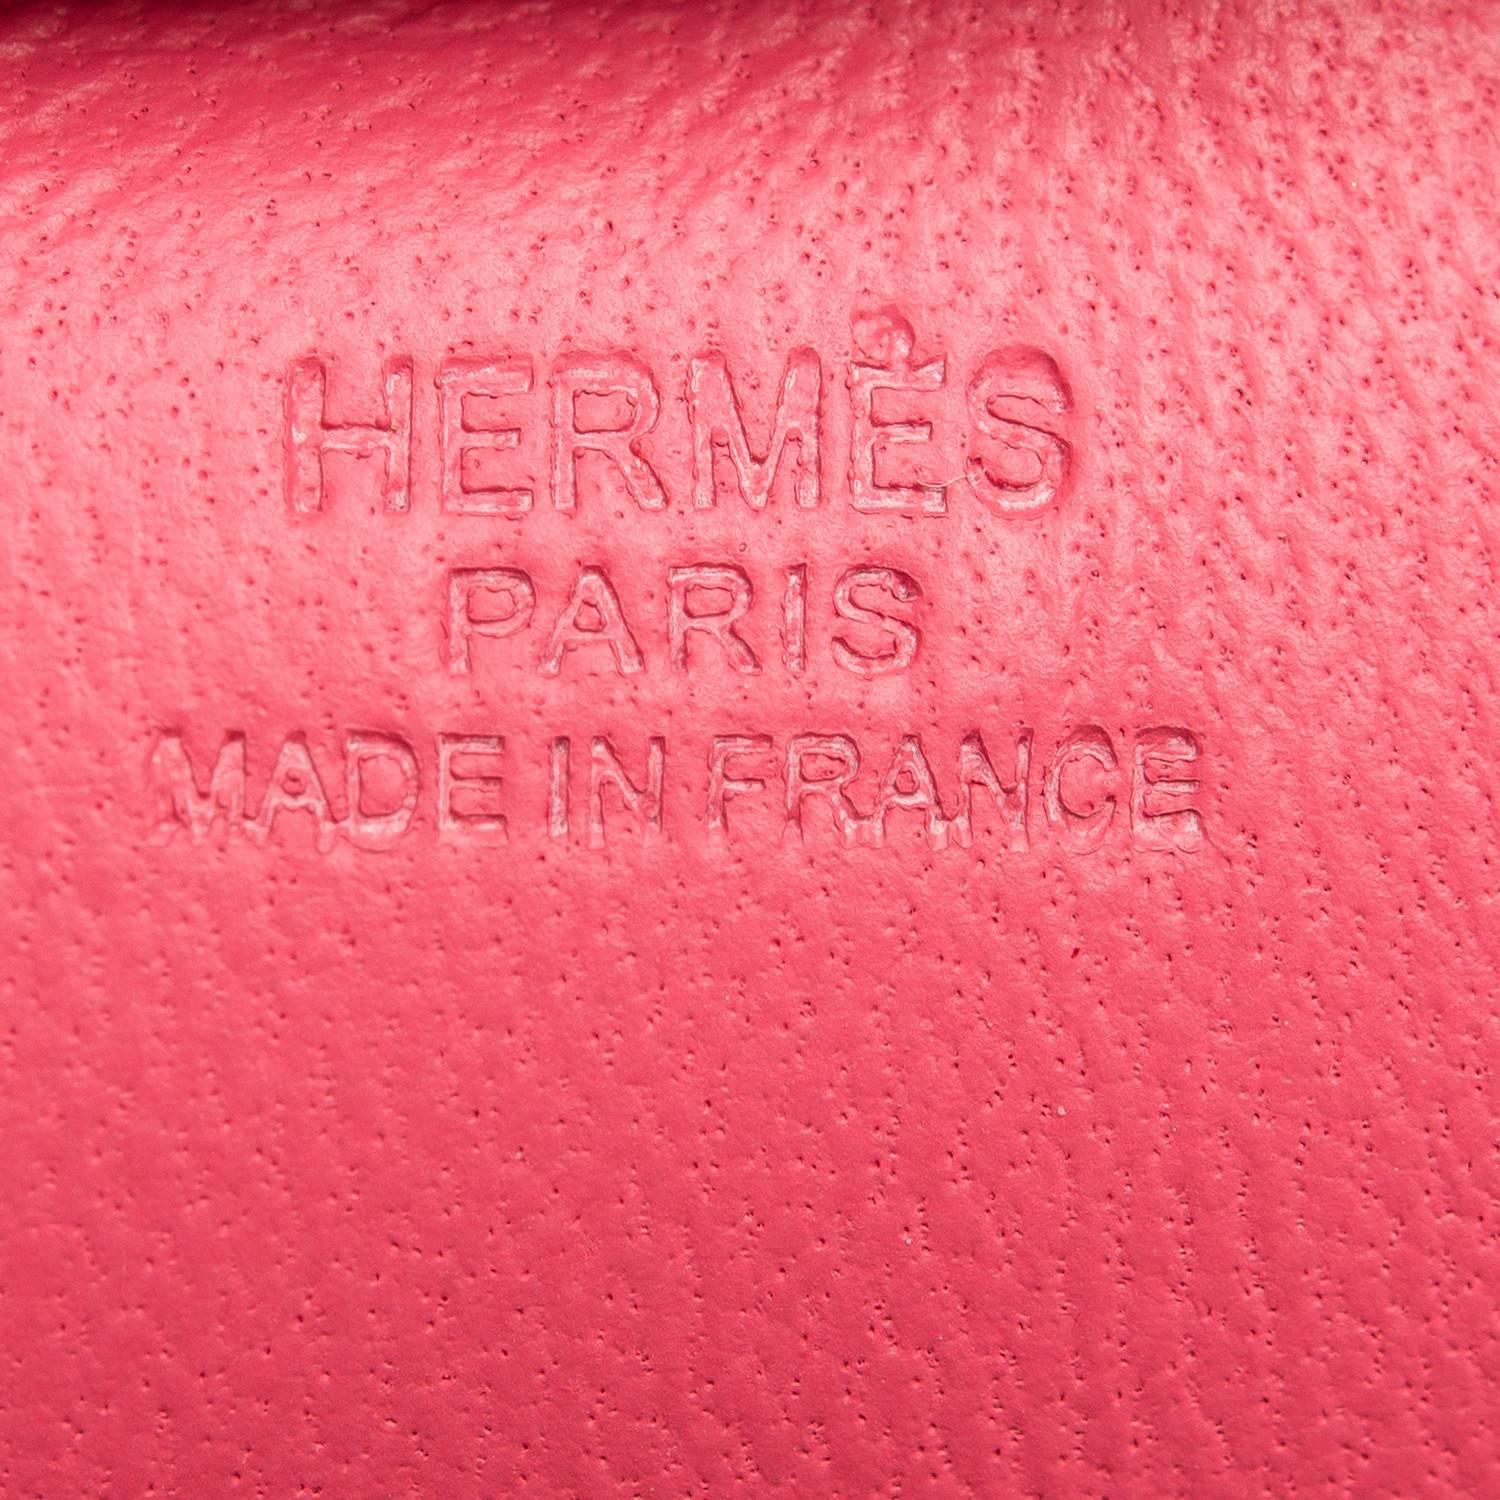 Hermes Grigri Rodeo bag charm in size MM.
 
This charm is made of Rose Azalea Milo lambskin leather and accented with a Orange Poppy mane and tail and a red saddle and holder.

Origin: France
 
Condition: Never carried
 
Accompanied by: Hermes box